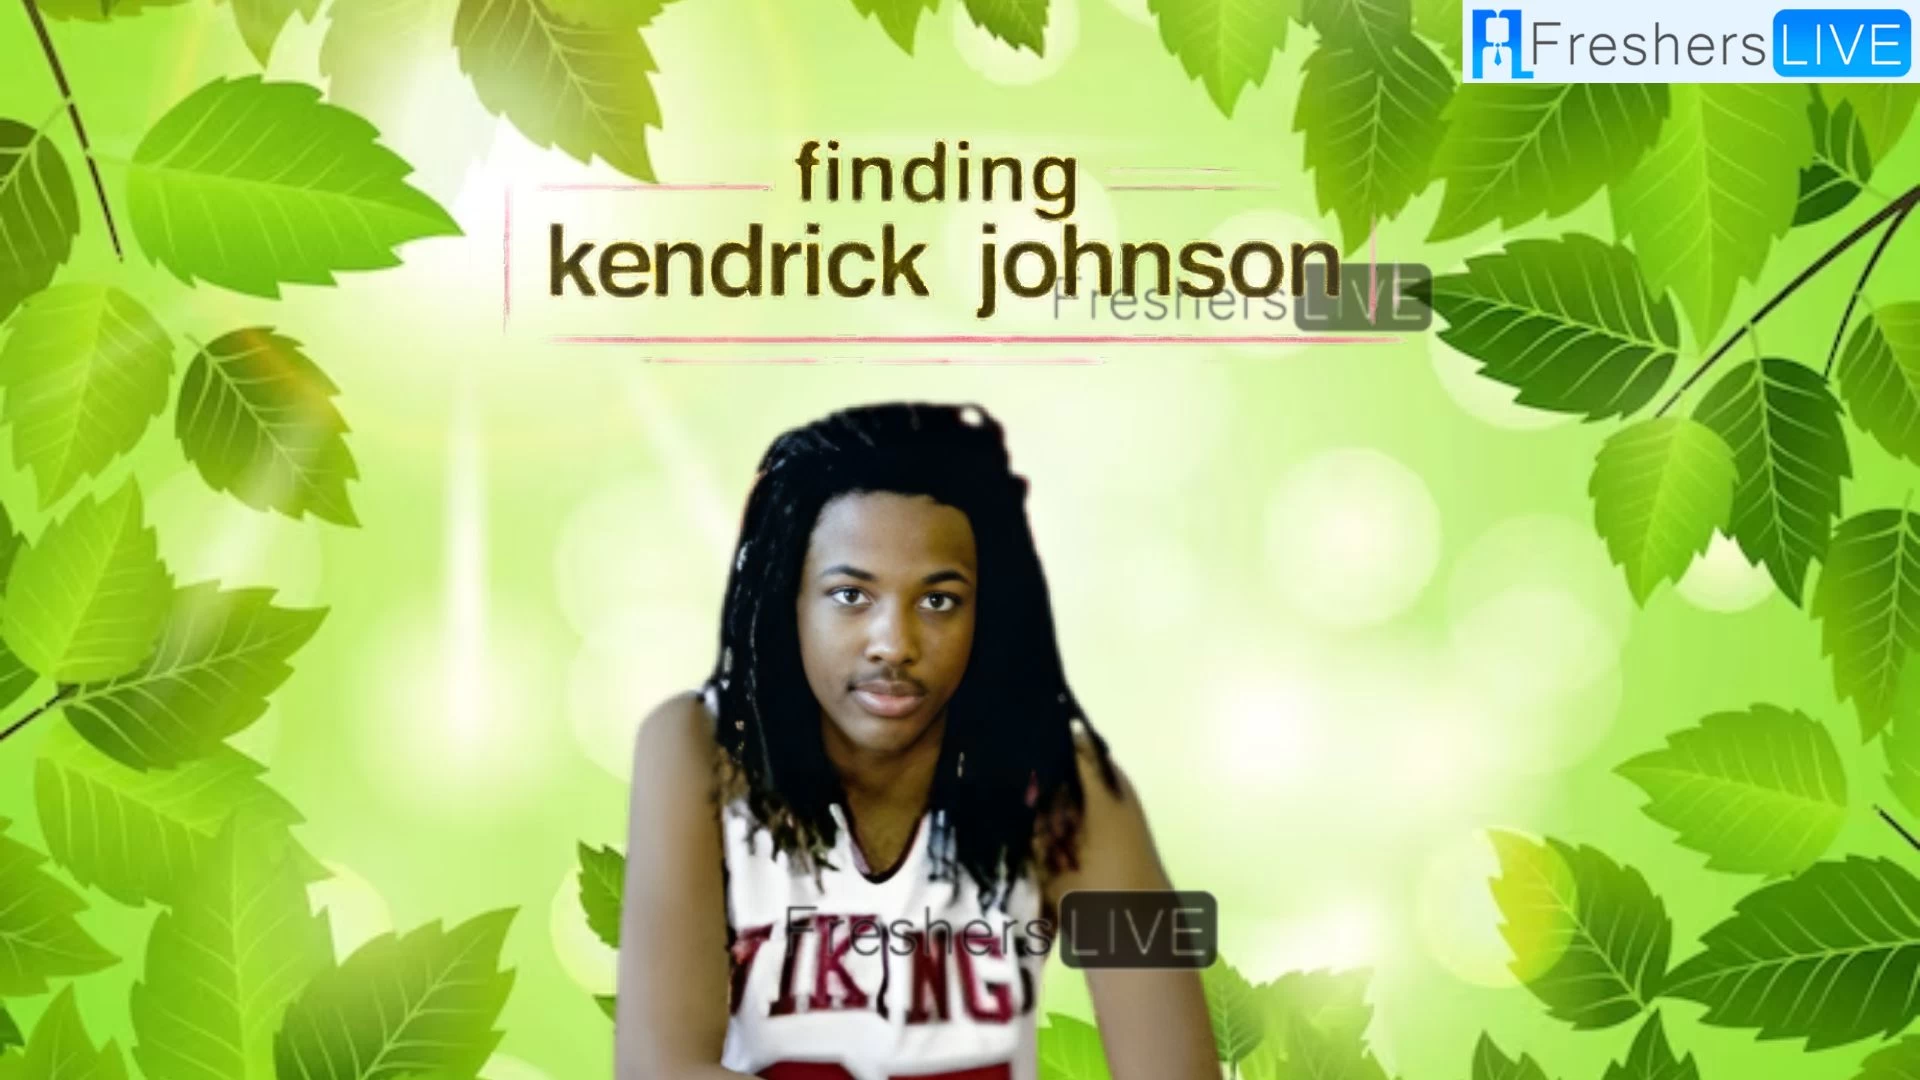 Where To Watch Finding Kendrick Johnson Documentary? Who Is Kendrick Johnson?